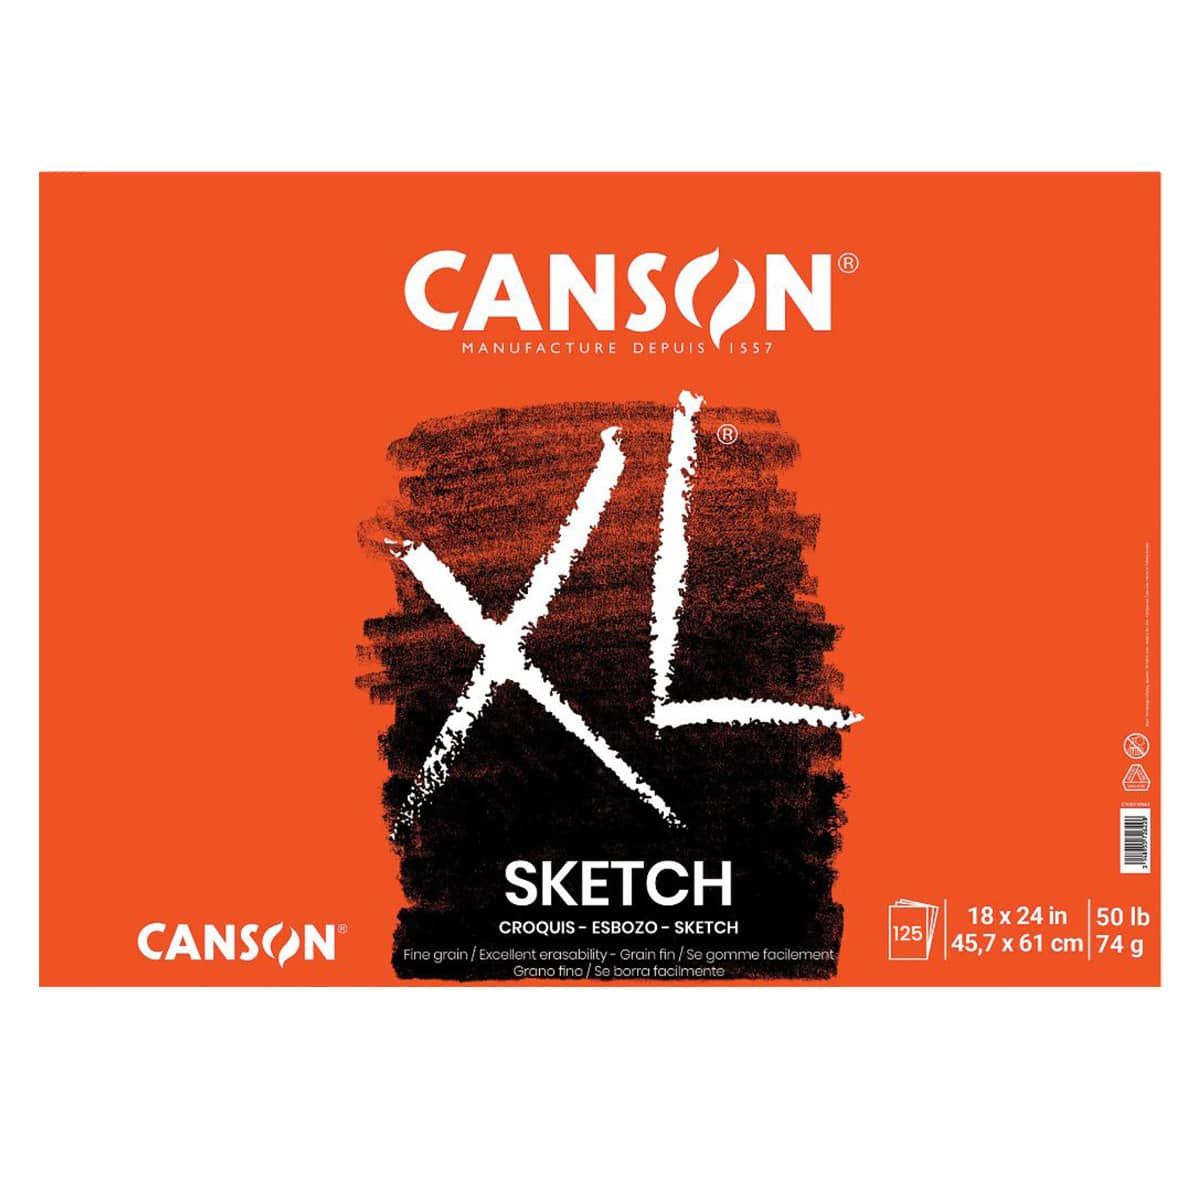 Help! What am I doing wrong? I recently bought Canson XL